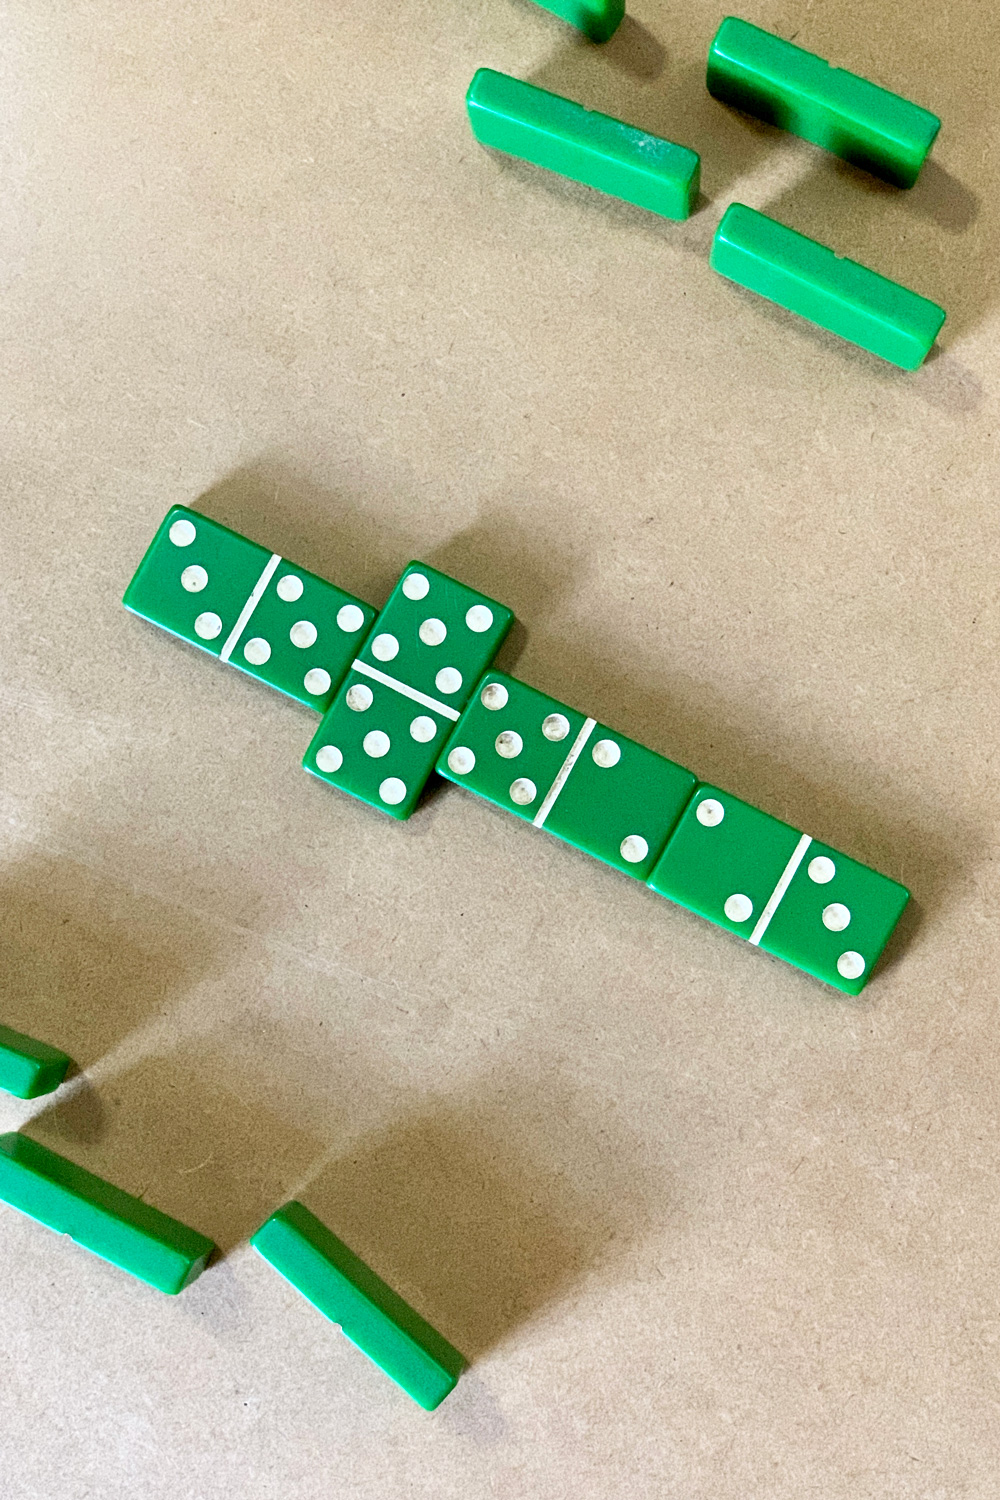 A line of 4 dominoes with a double 5 in the center as the spinner.